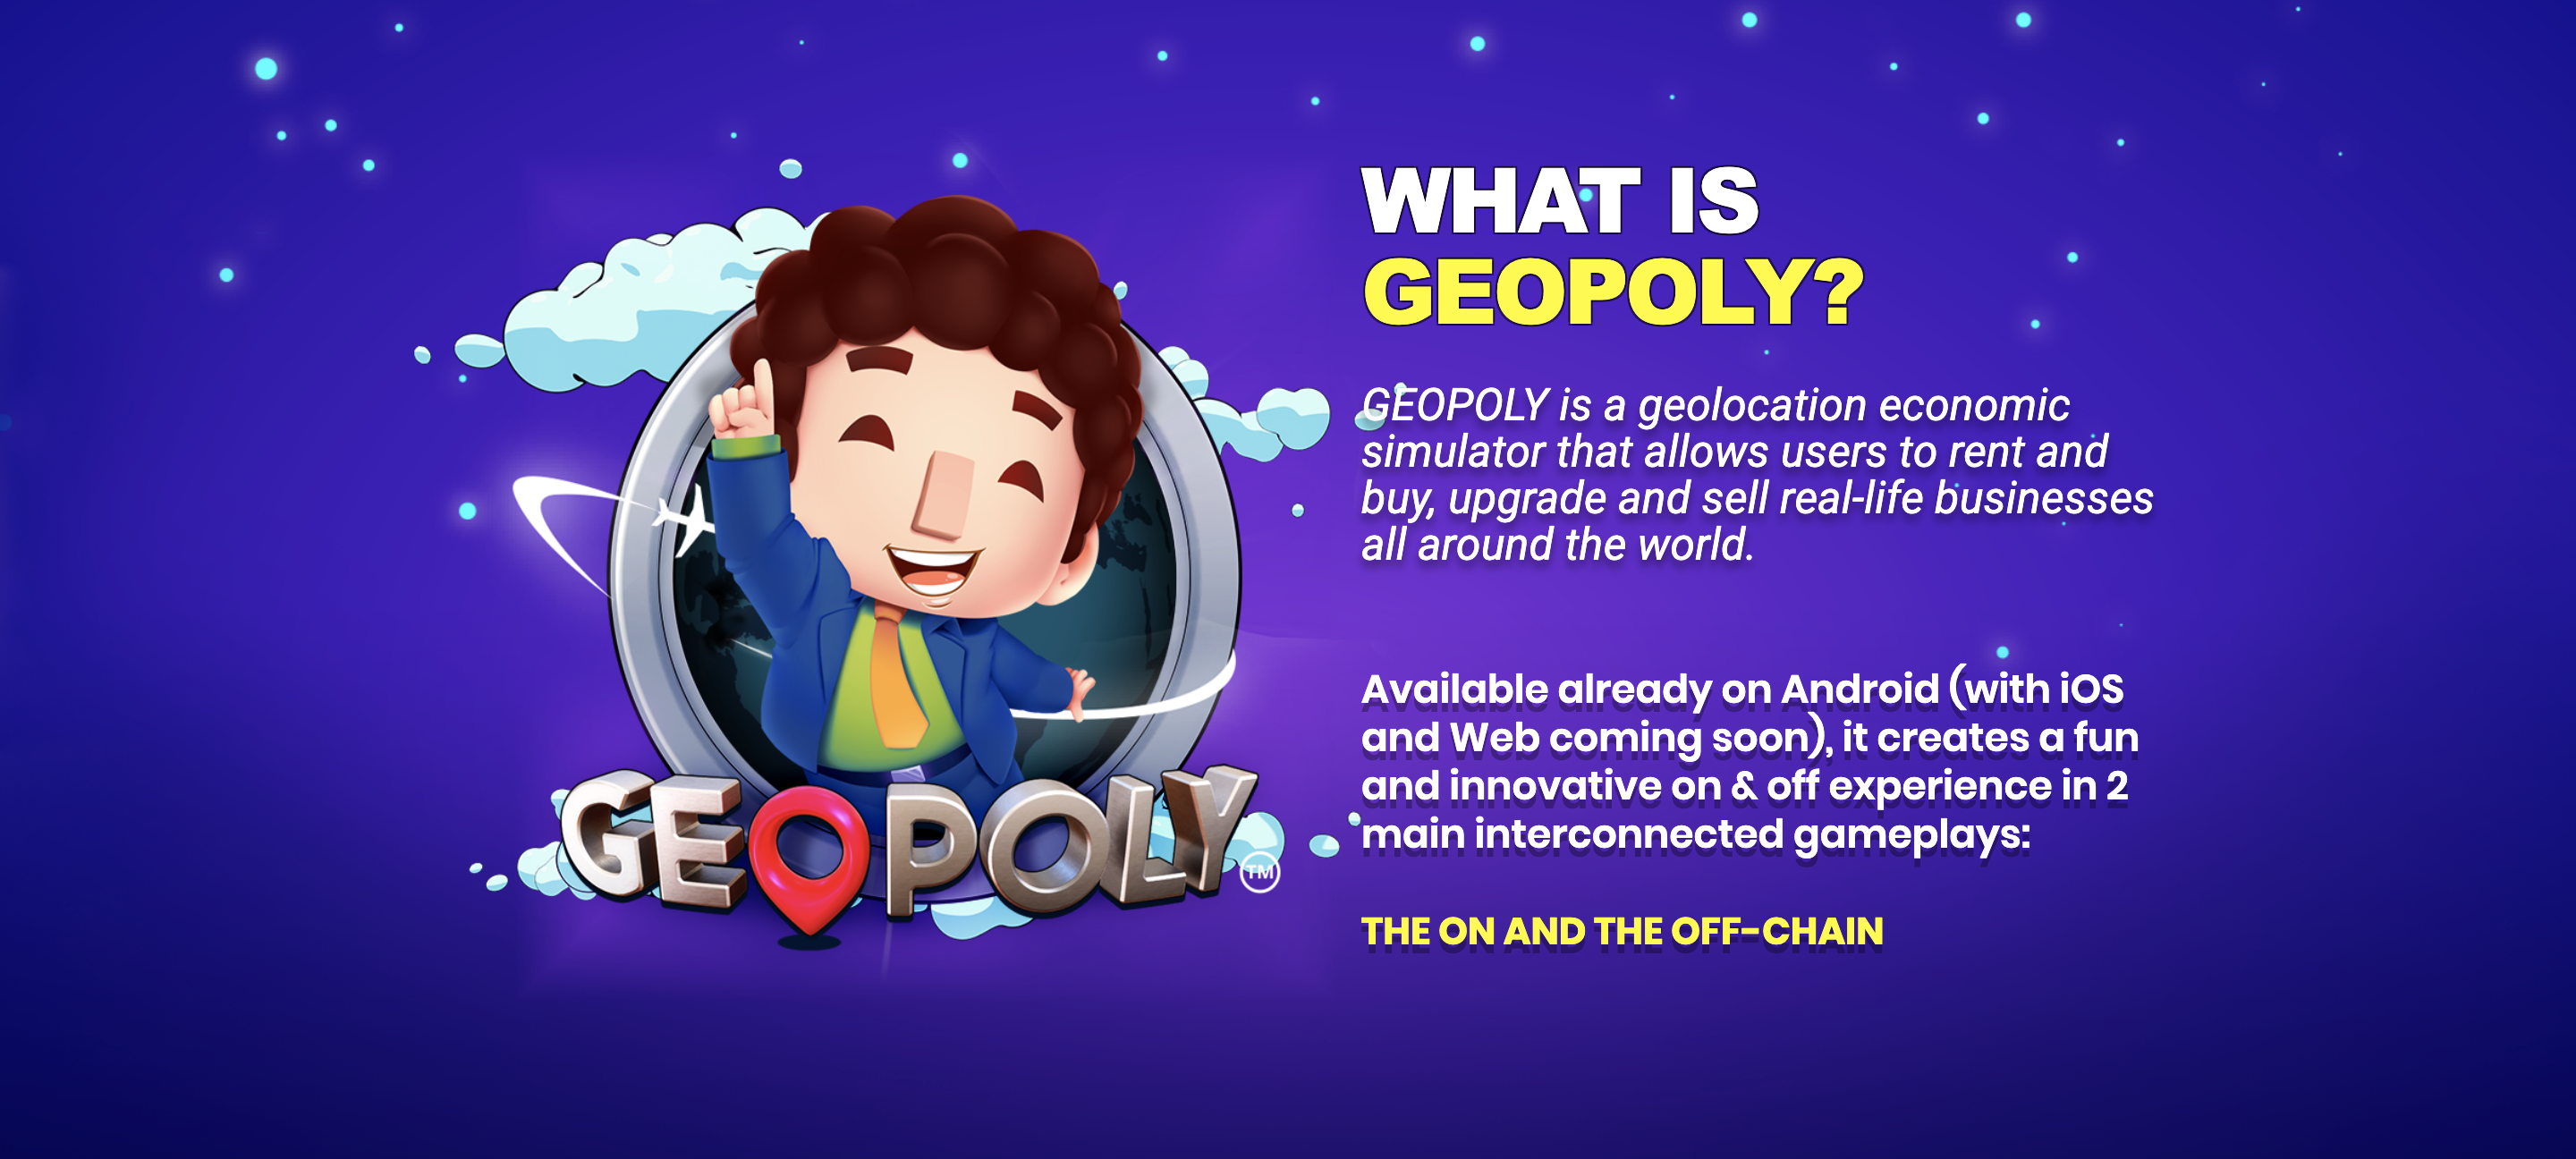 Geopoly (GEO) - All information about Geopoly ICO (Token Sale) - ICO Drops